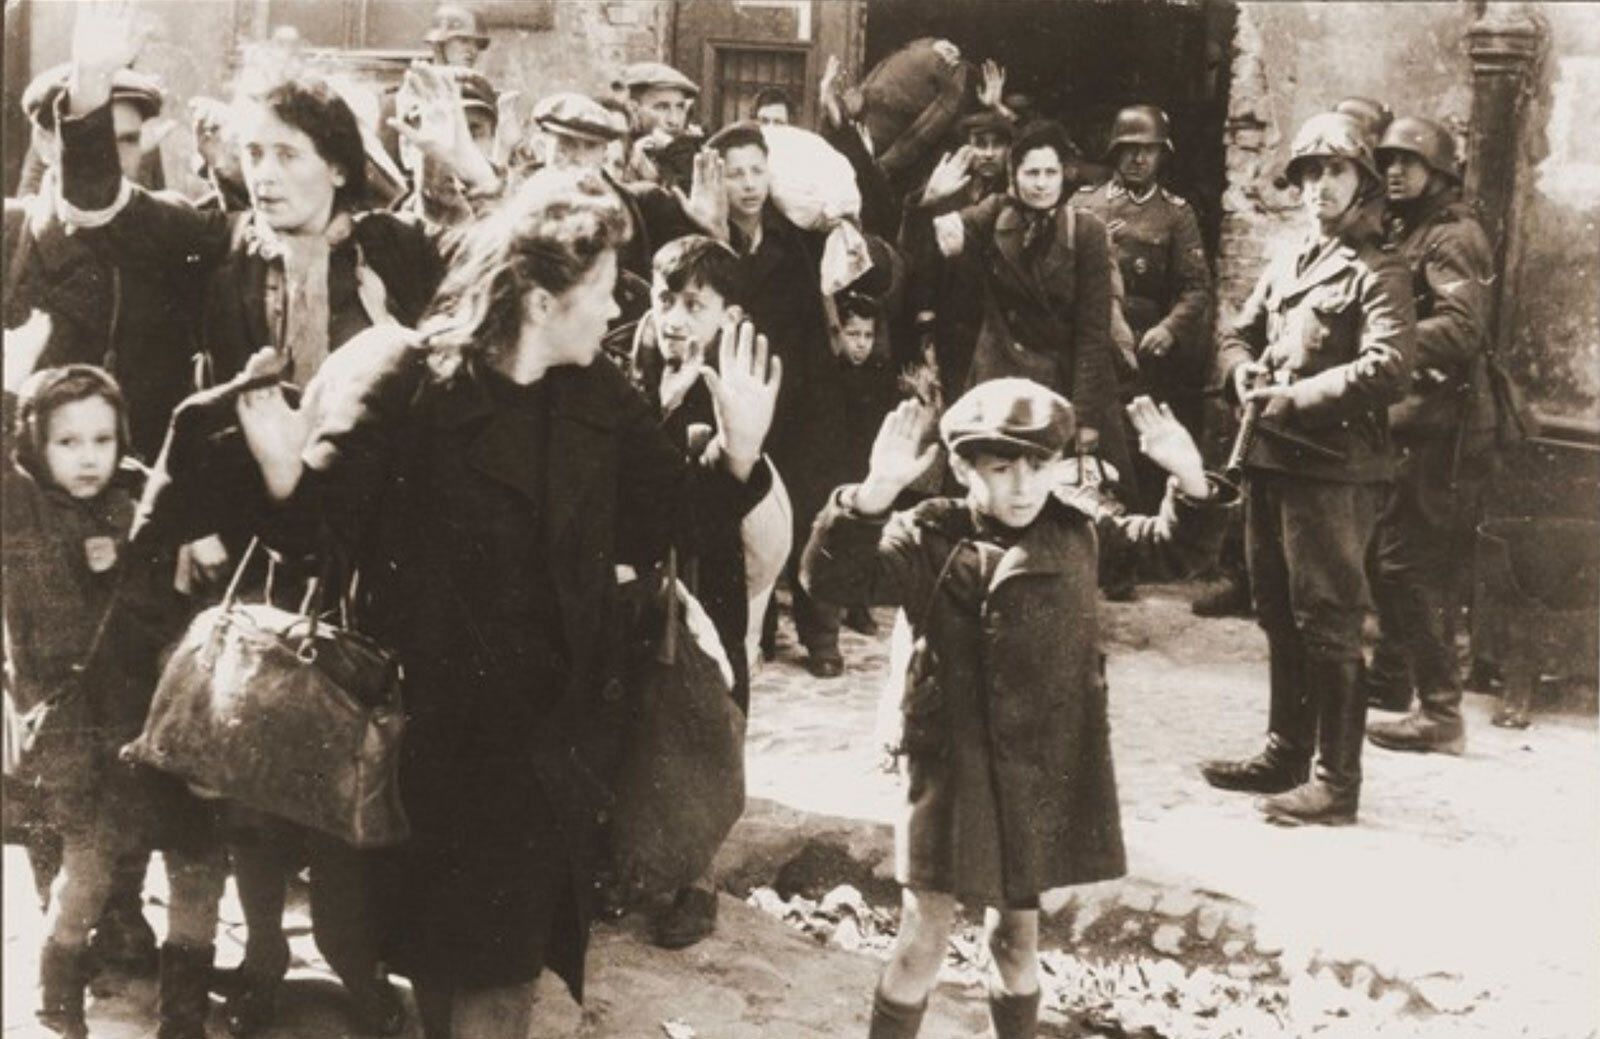 This image shows a 1943 photograph of Nazi soldiers deporting Jews to death camps following the Warsaw ghetto uprising in Warsaw, Poland.